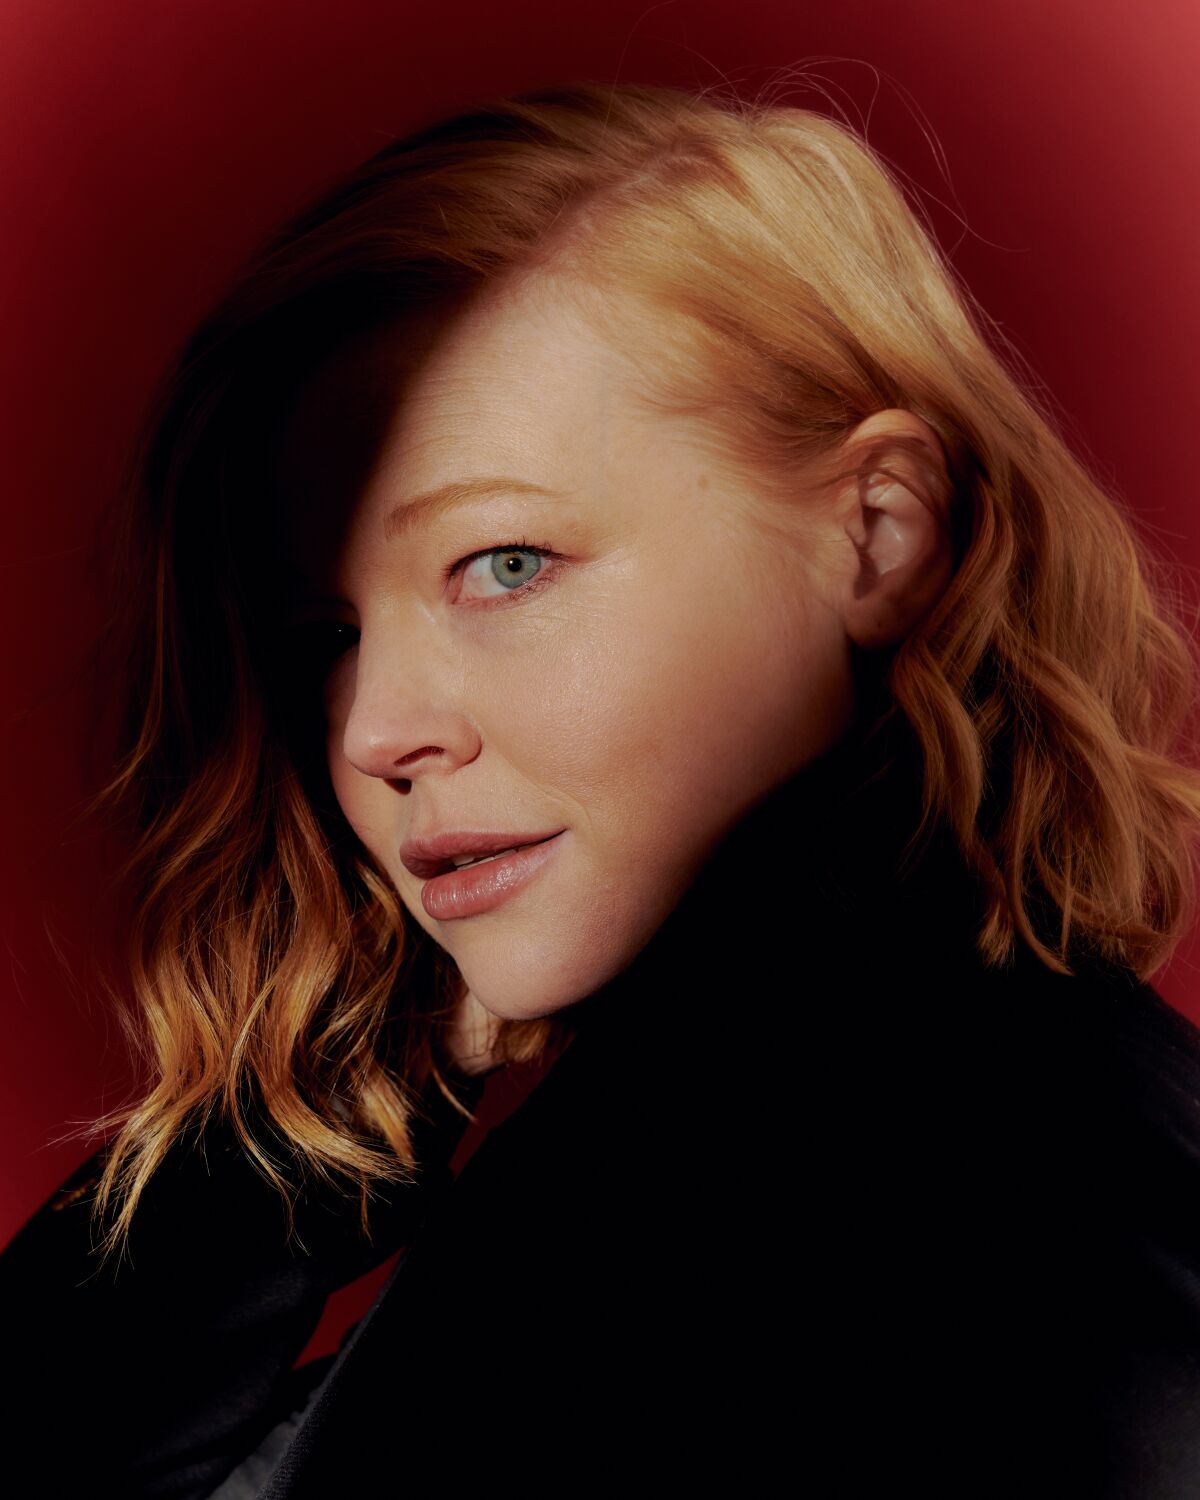 From the shadows a light shines on the left side of Sarah Snook's face.